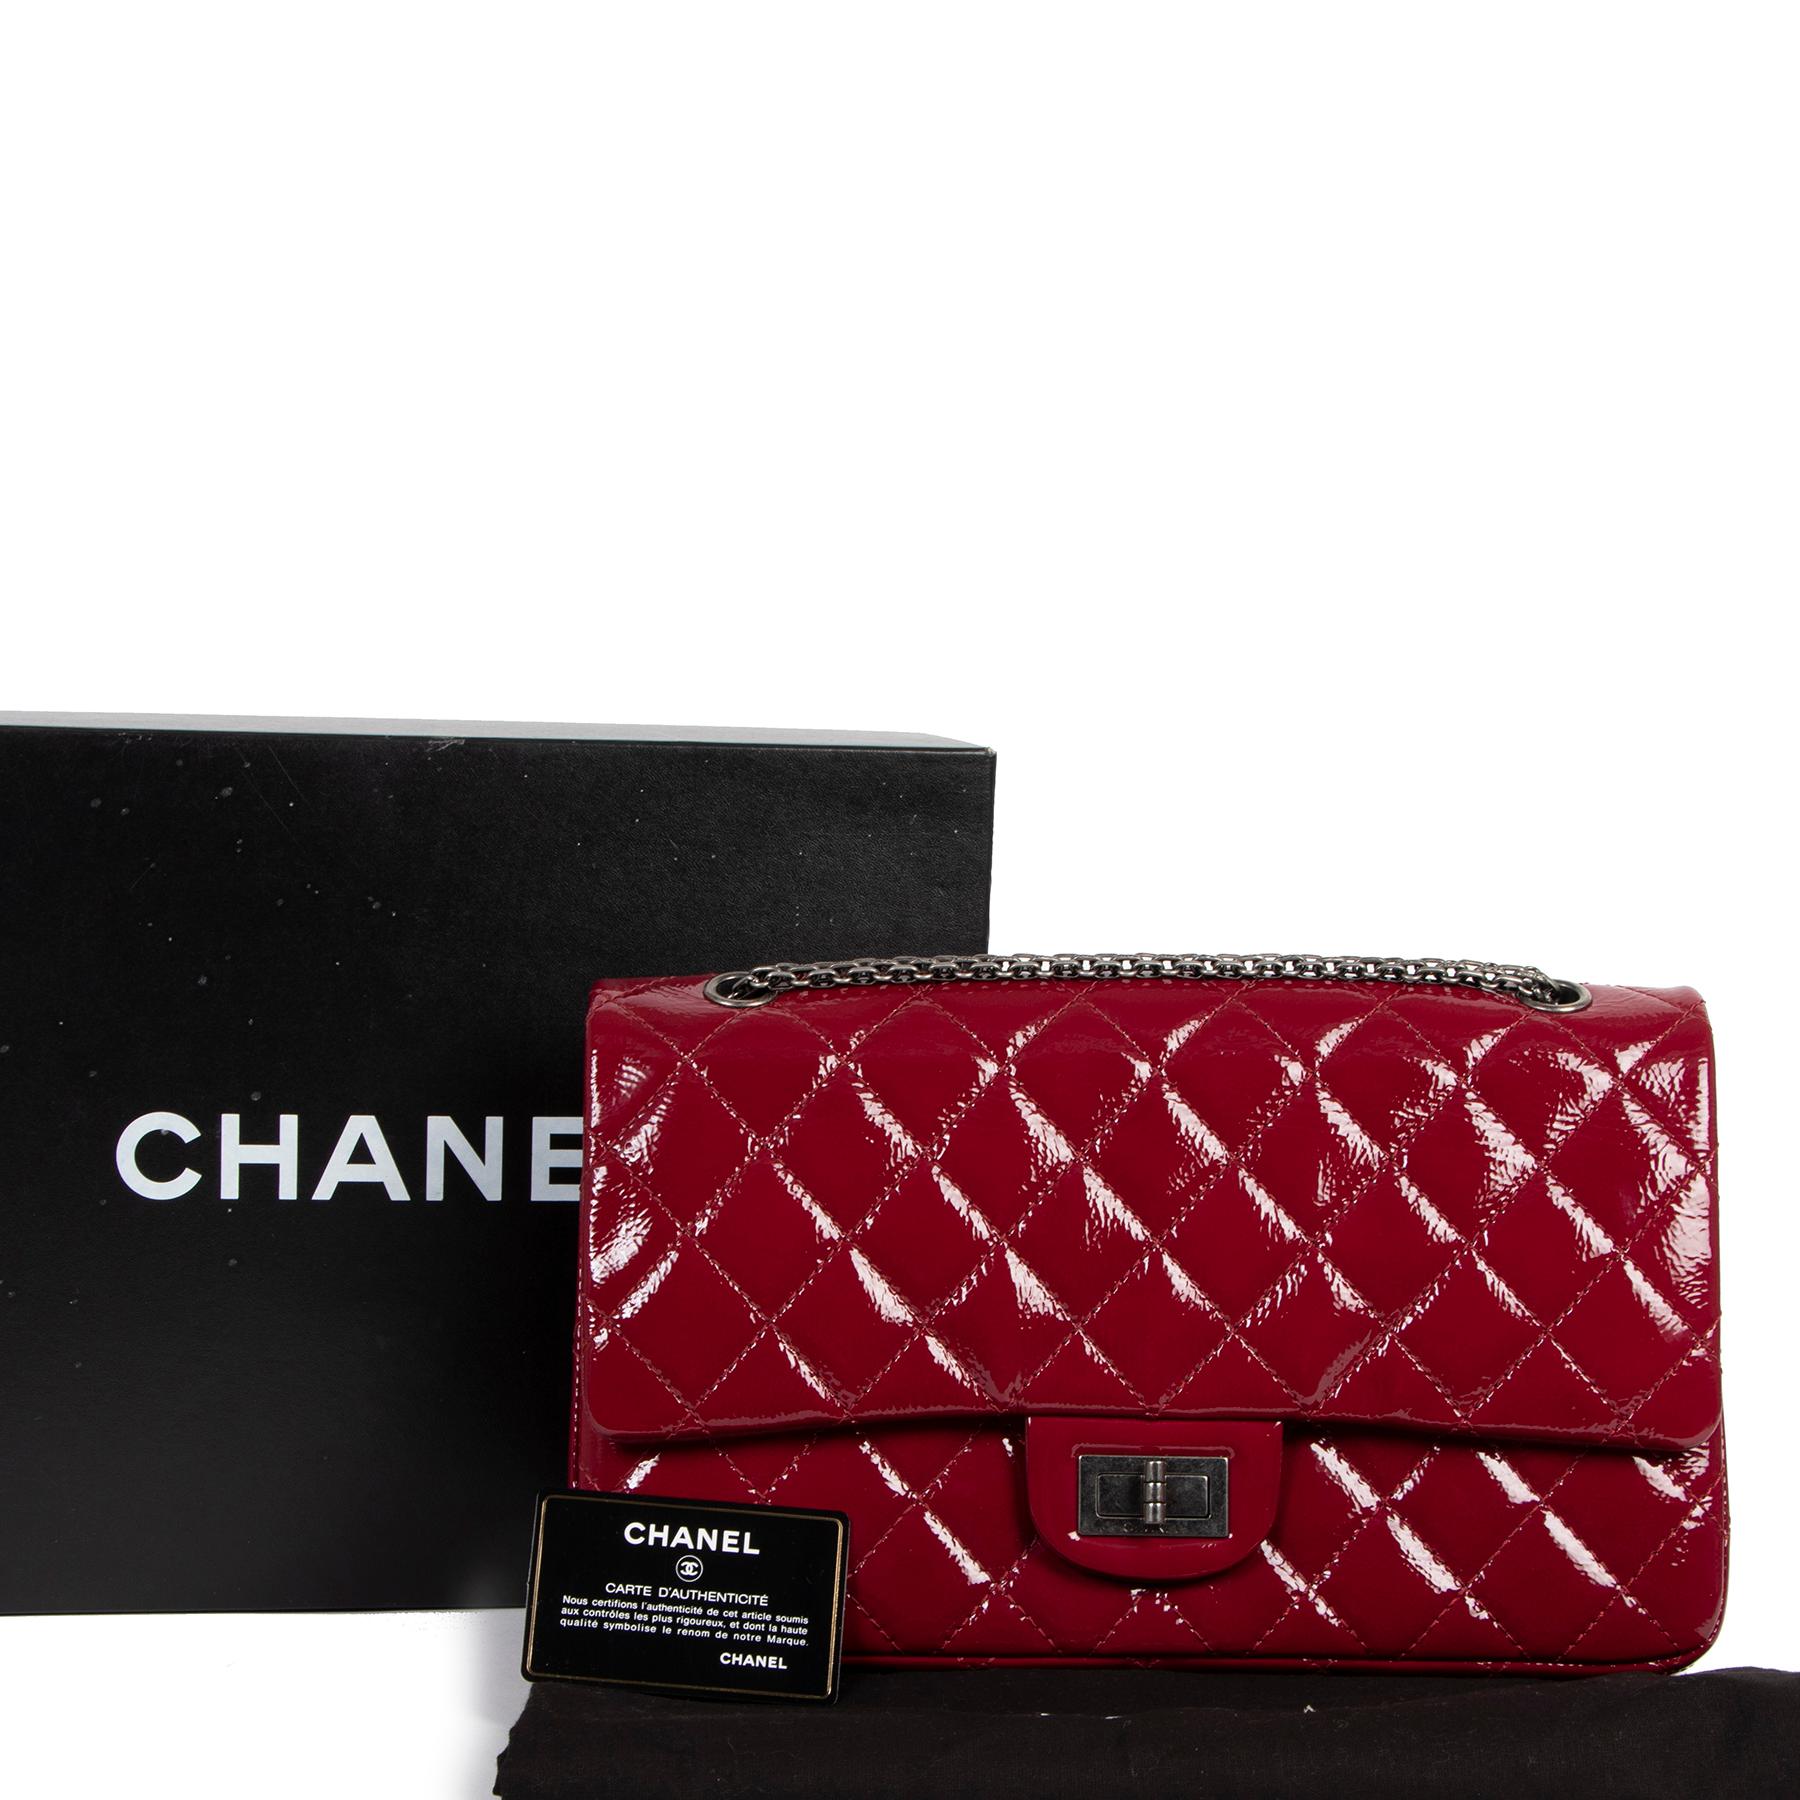 Excellent condition

Chanel 2.55 Reissue 227 Cranberry Patent Leather Bag

This gorgeous Chanel Reissue features the classic double flap design in exclusive cranberry red patent leather, finished with a dark grey chain strap and the iconic front